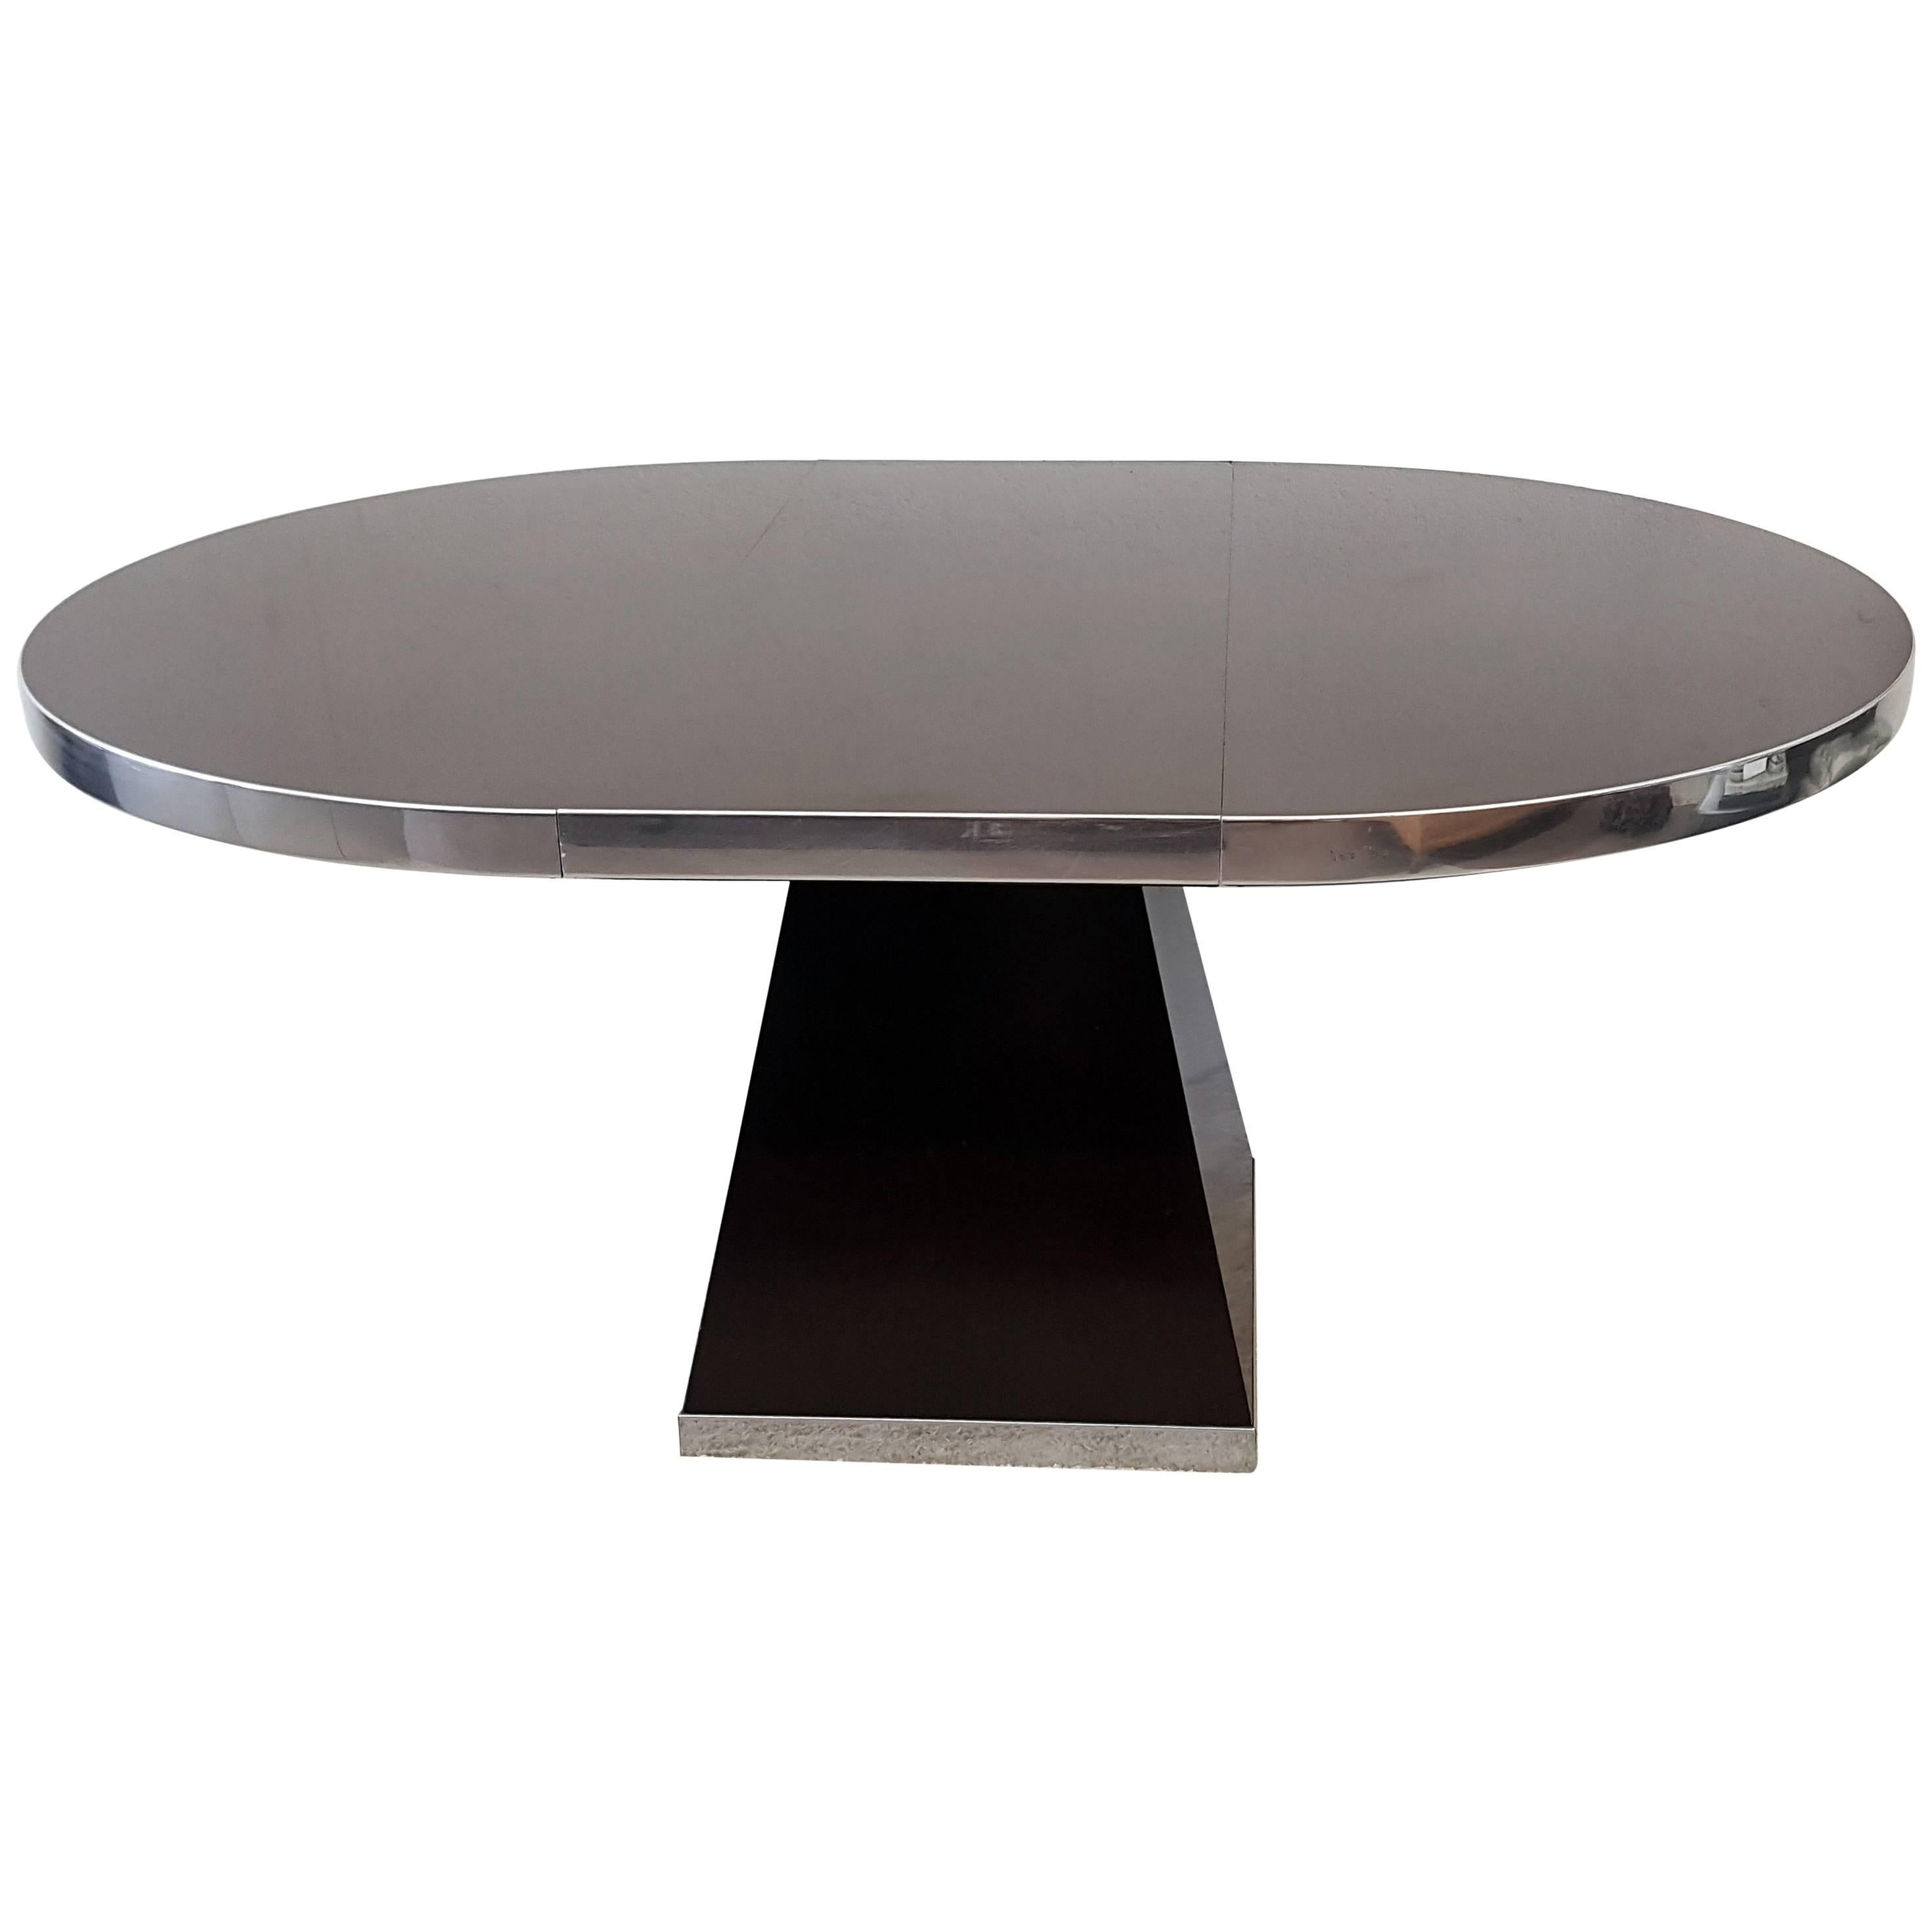 Pierre Cardin Chocolate Laminate and Polished Chrome Dining Table